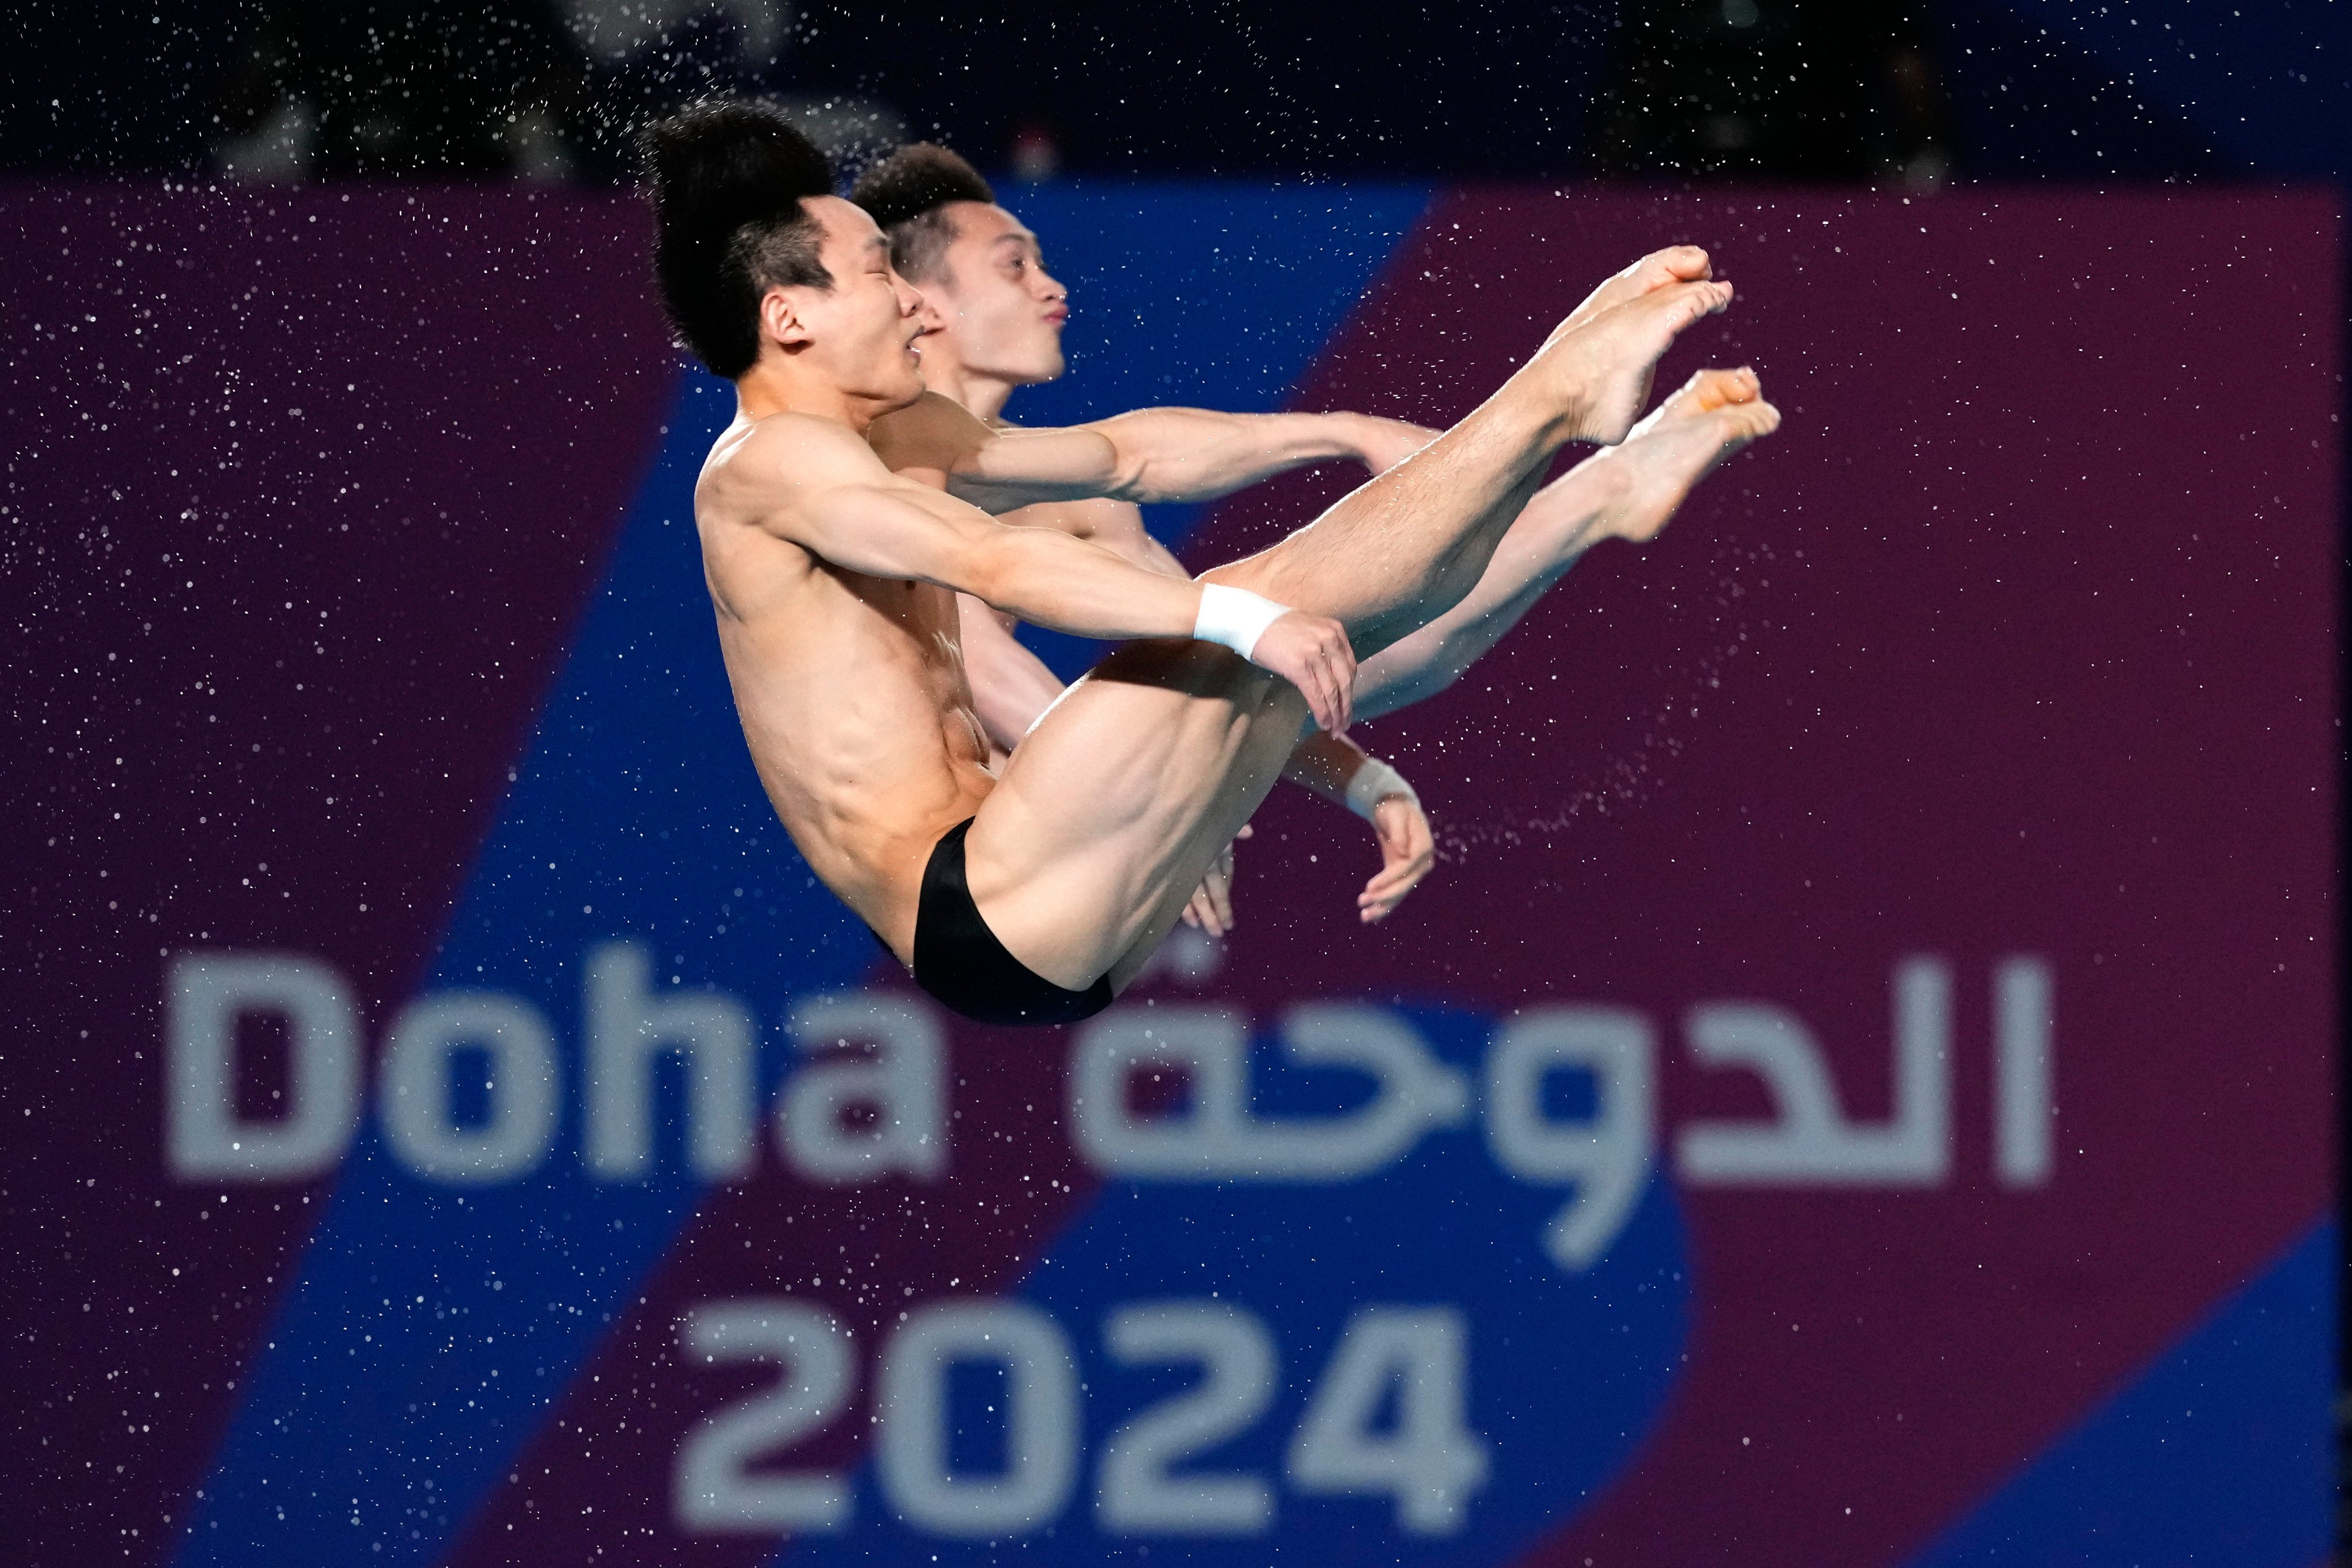 Lian Junjie and Yang Hao  compete during the men’s synchronized 10m platform diving final at the World Aquatics Championships in Doha, Qatar. Photo: AP